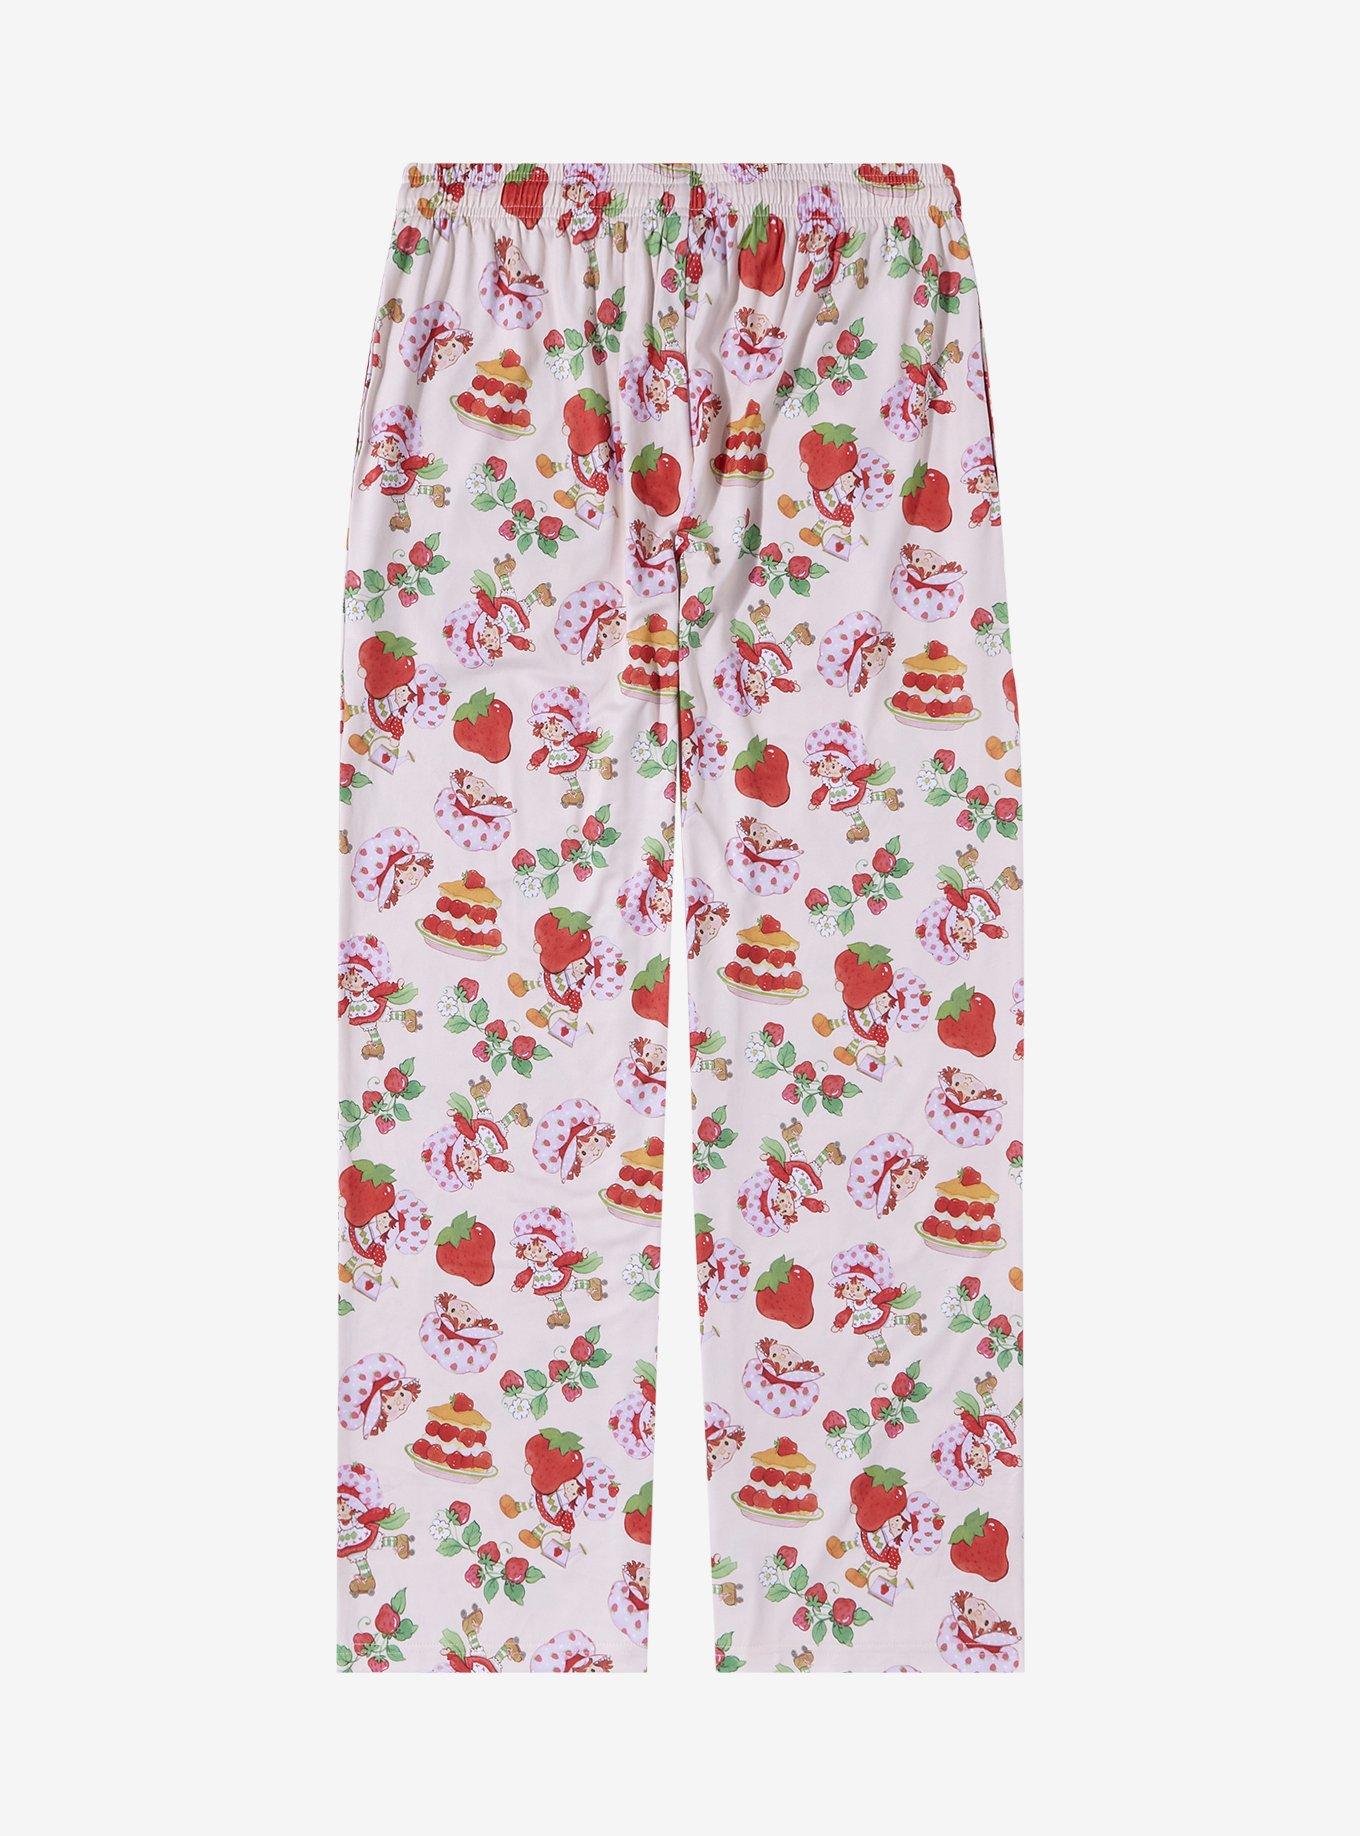 Strawberry Shortcake Icons Allover Print Sleep Pants - BoxLunch Exclusive, , hi-res